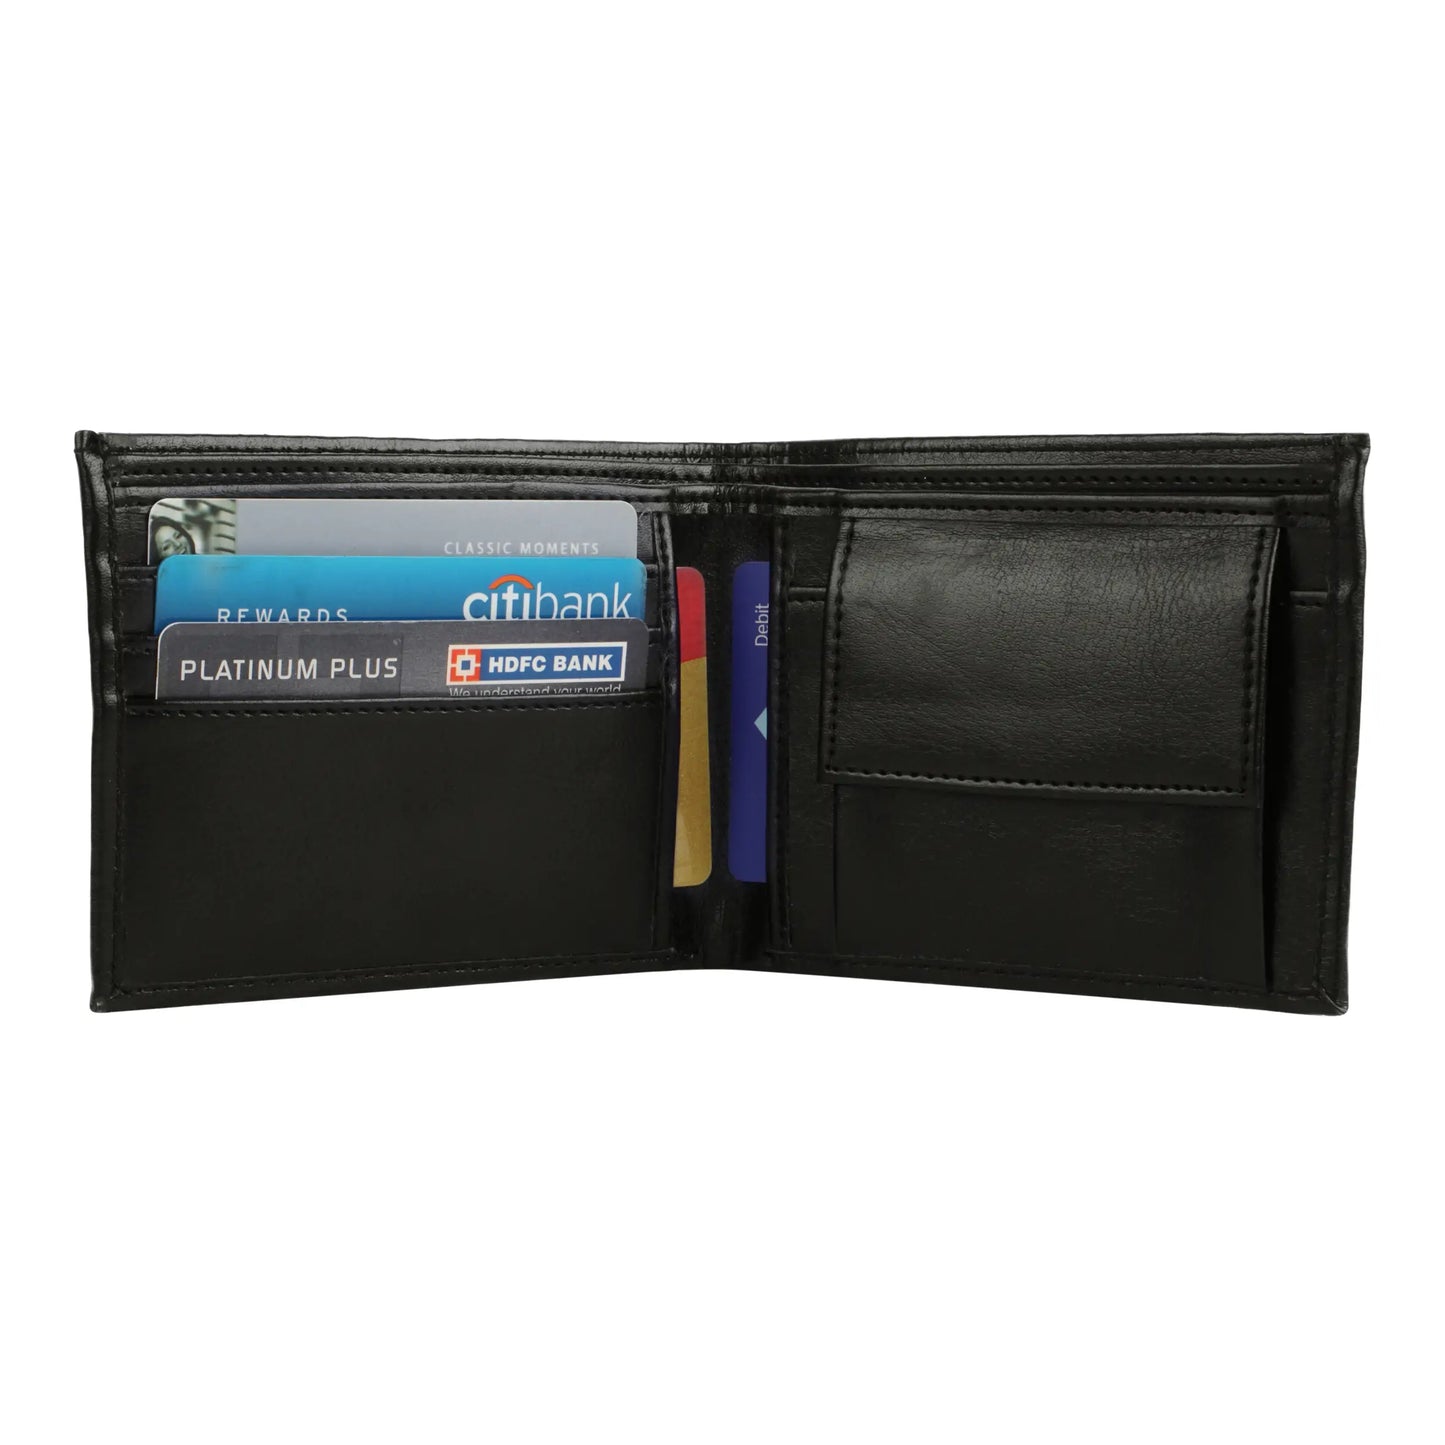 Pen, Keychain and Wallet 3in1 Combo Gift Set - For Employee Joining Kit, Corporate, Client or Dealer Gifting, Promotional Freebie JKSR130